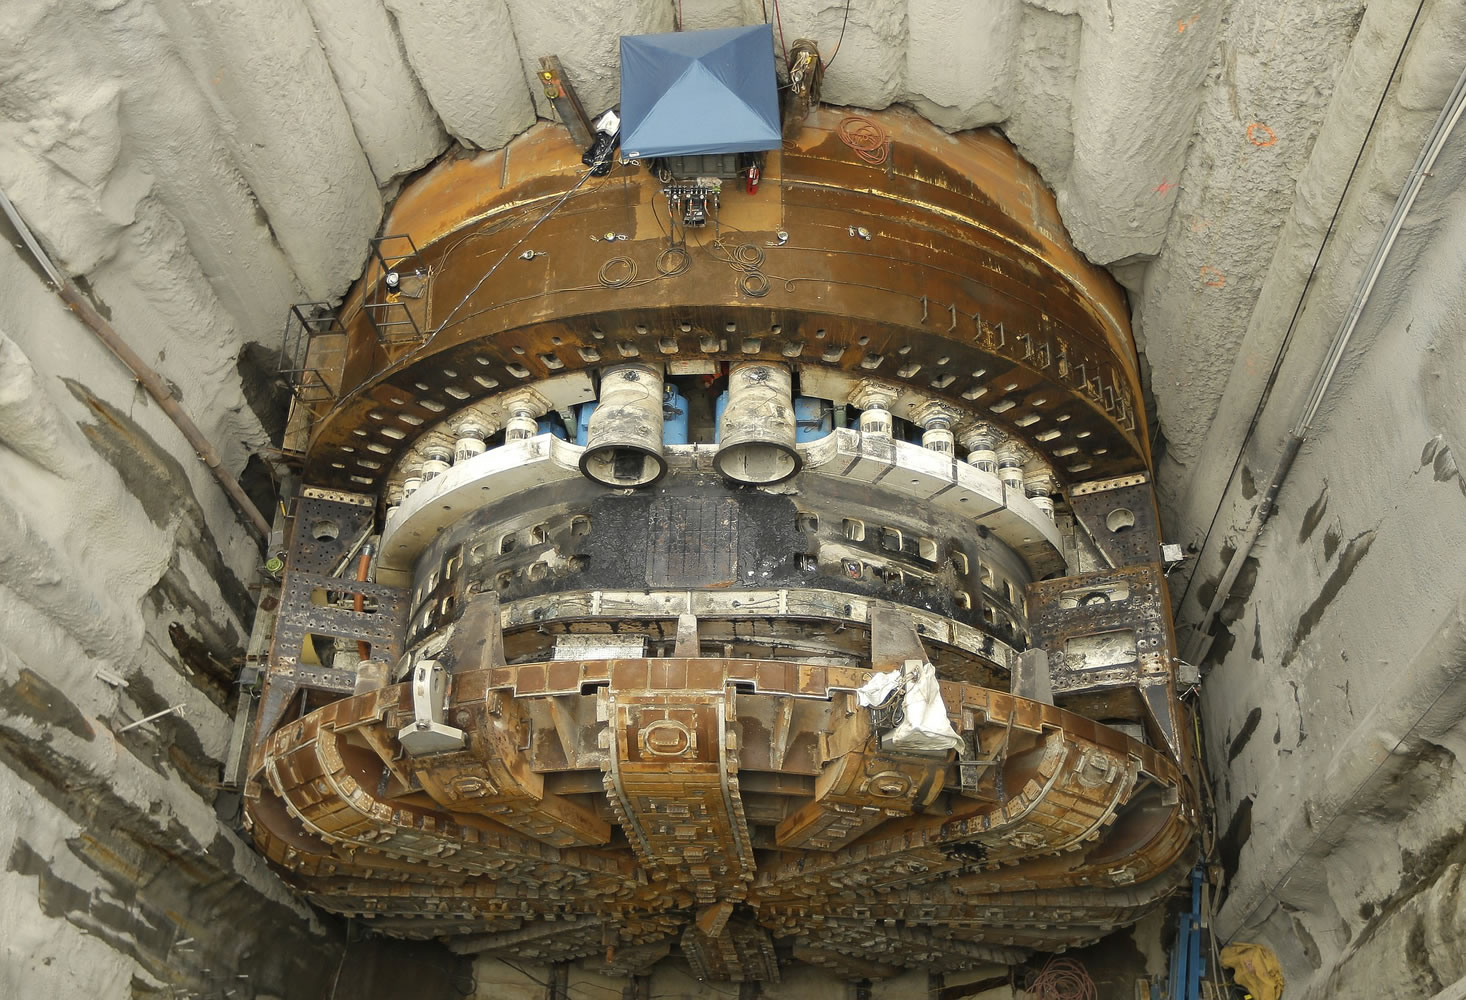 The inner workings of the cutting head of Bertha are shown at the bottom of a 120-foot access pit after a 270- ton section of the front shield was removed.